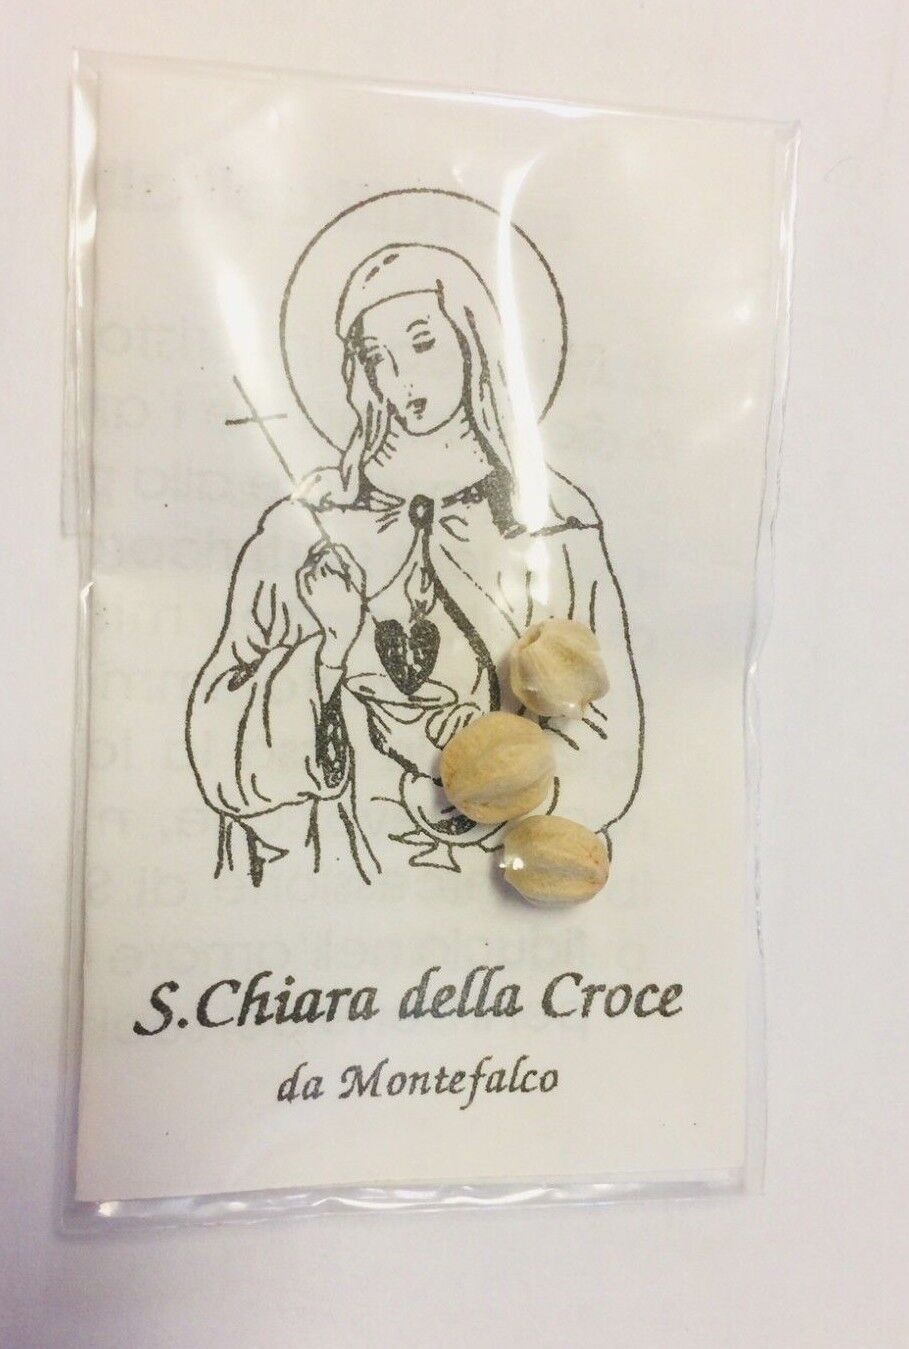 Saint Clare of Montefalco Nuts/Seeds, New from Italy